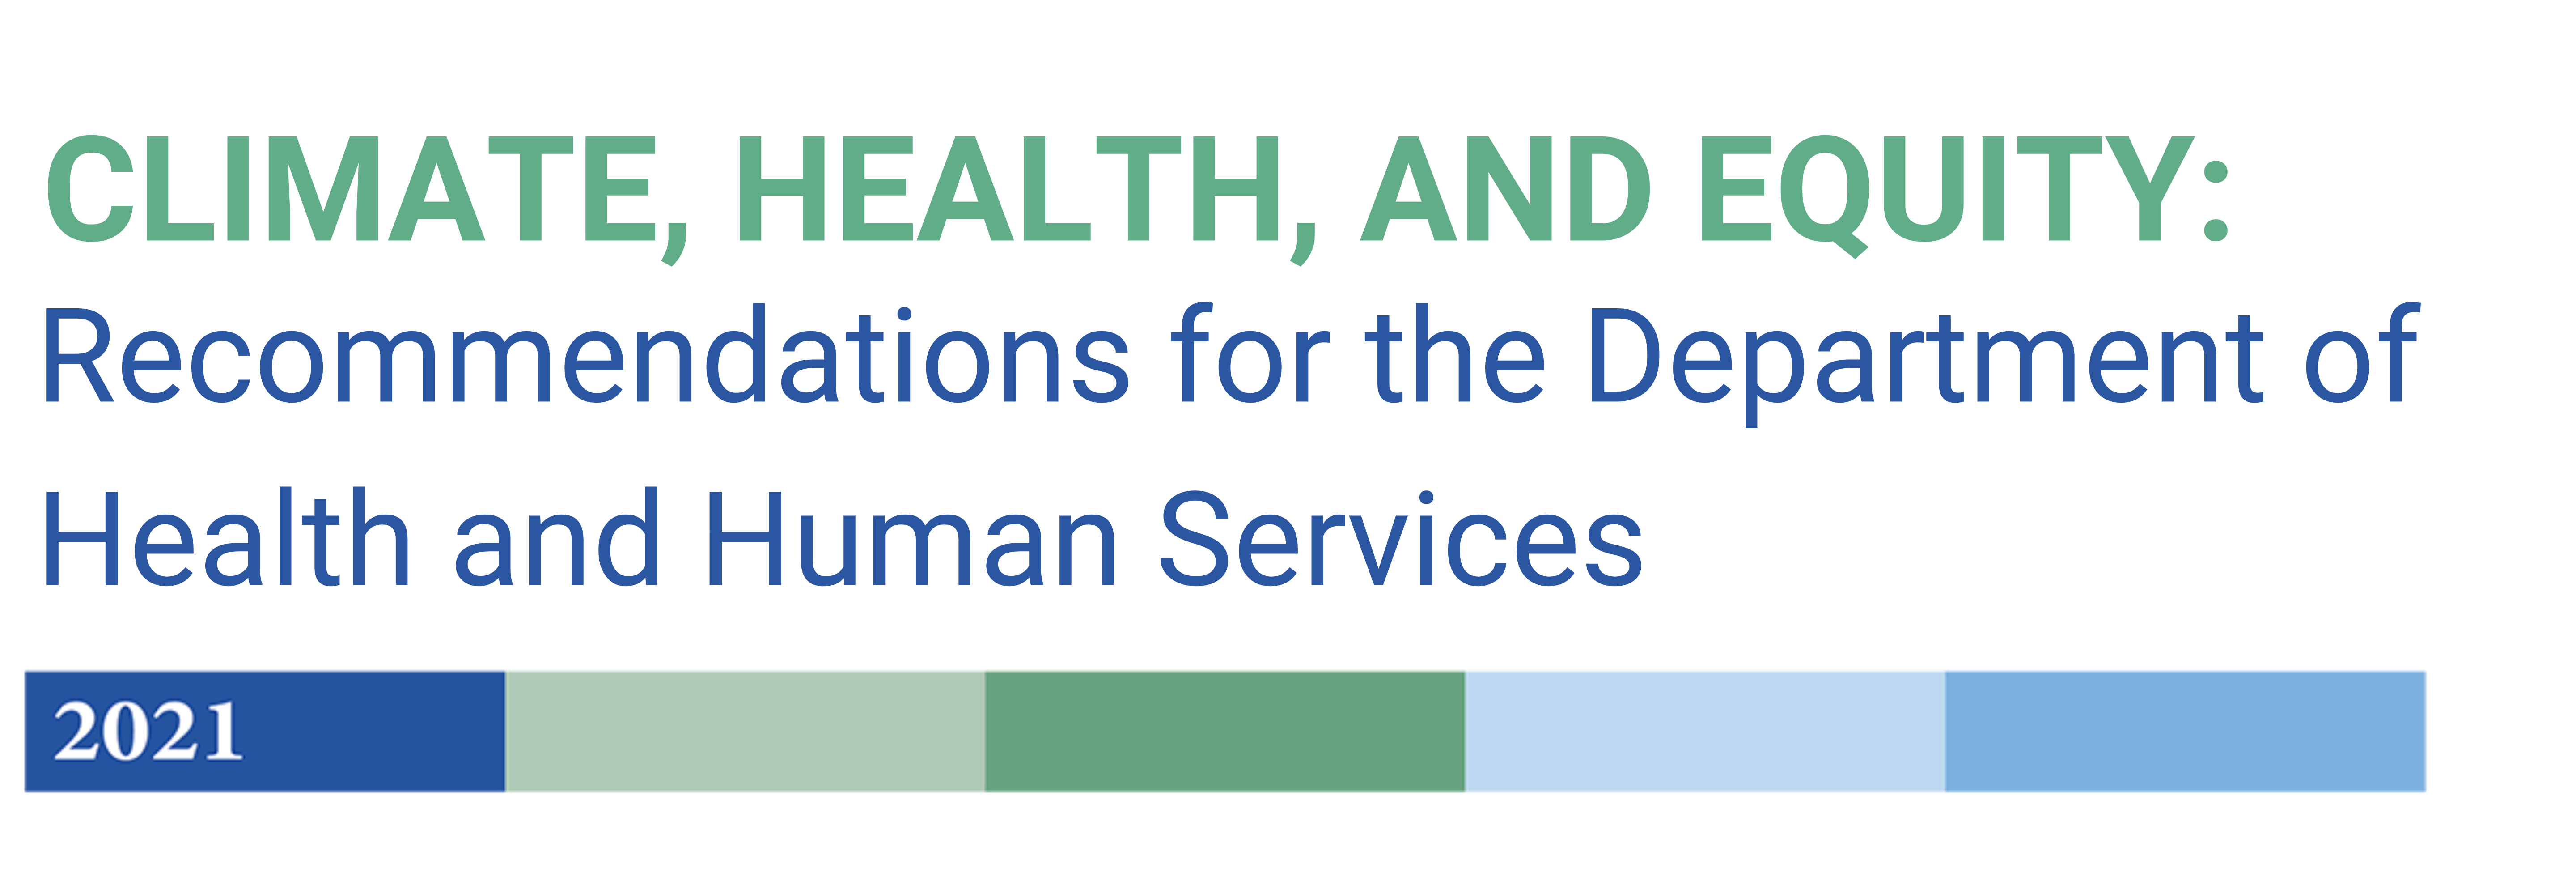 Recommendations for the Department of Health and Human Services